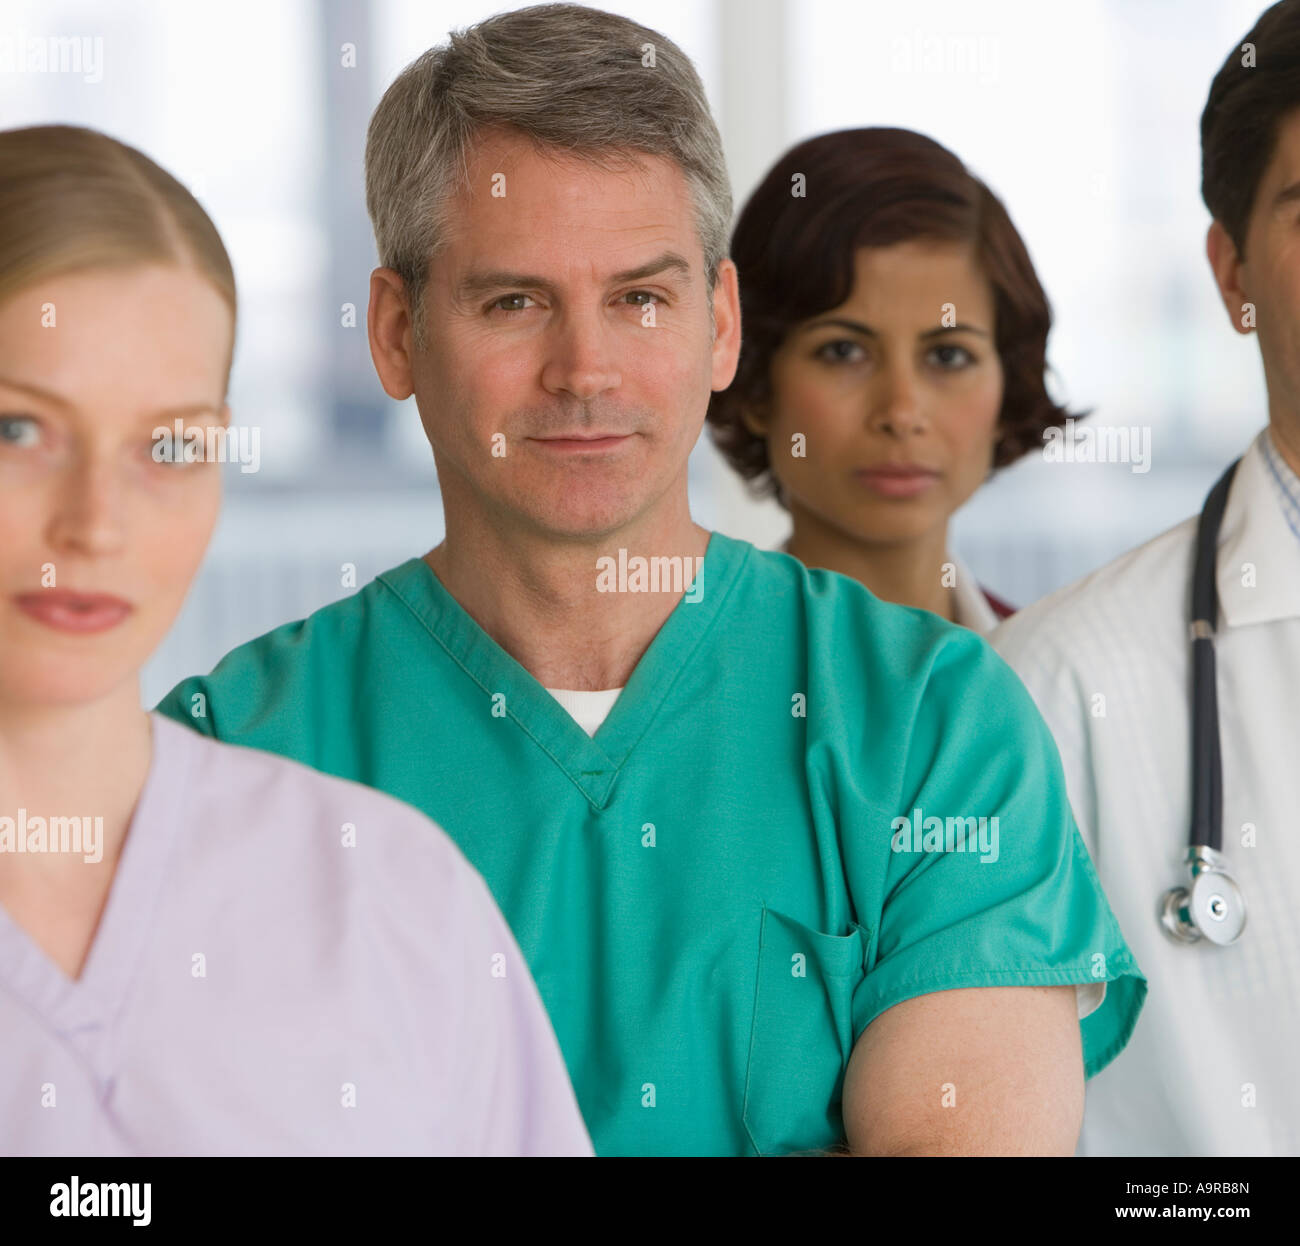 Row of medical professionals Stock Photo